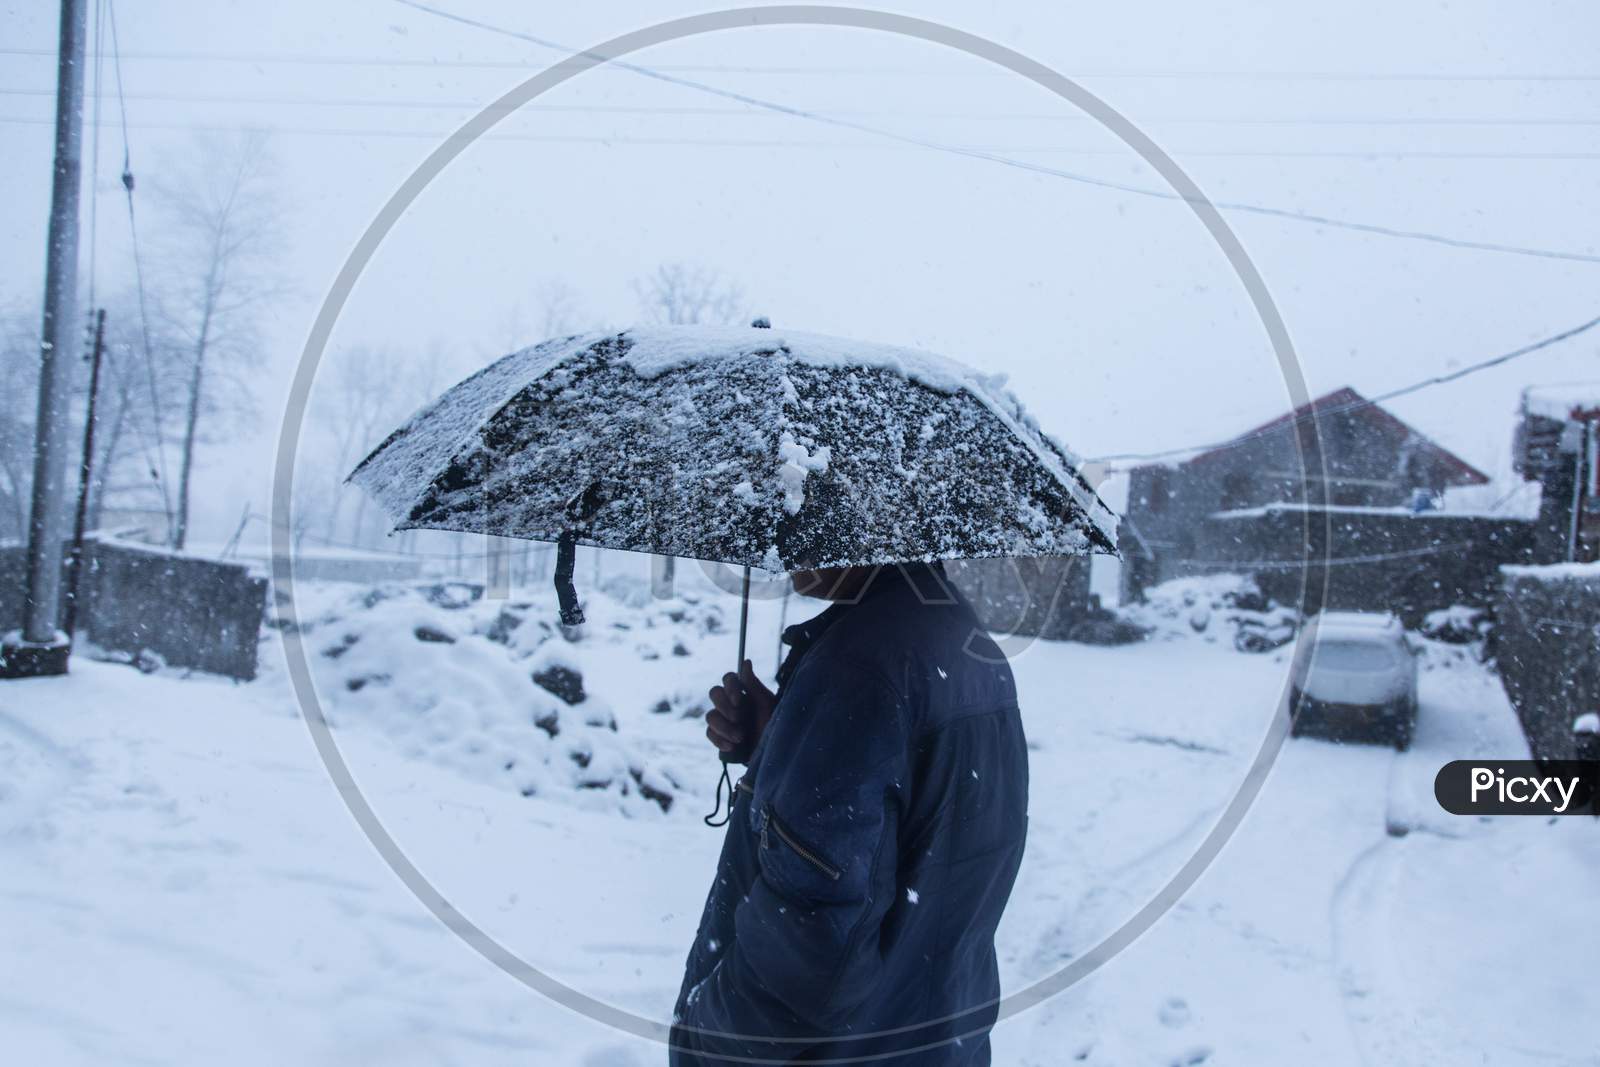 Winter Snow Falling,A Person Walking With Black Umbrella, Background - Image